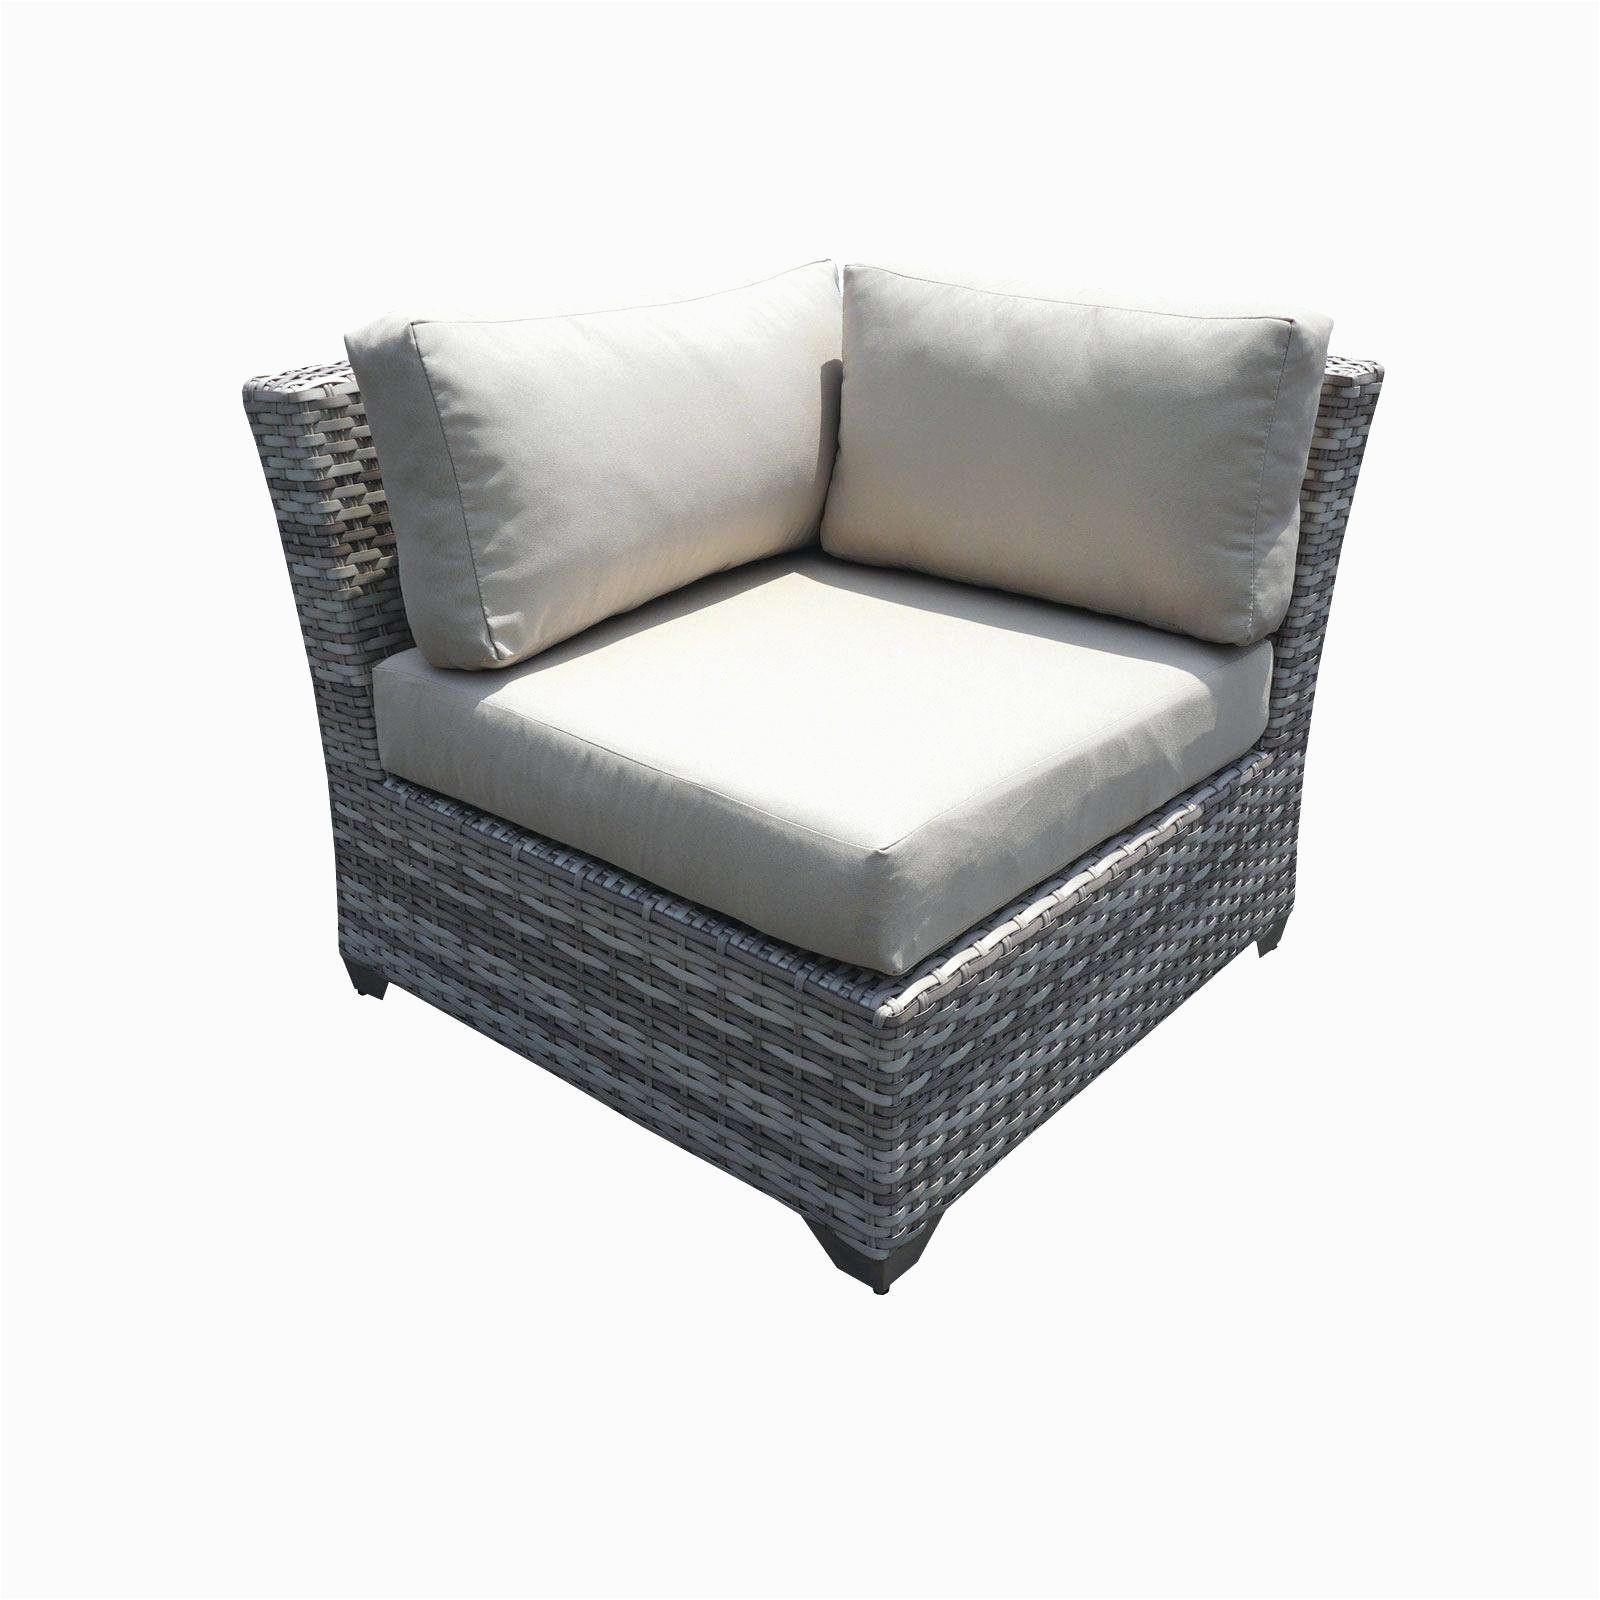 wicker outdoor sofa 0d patio chairs sale replacement cushions concept all weather wicker patio furniture